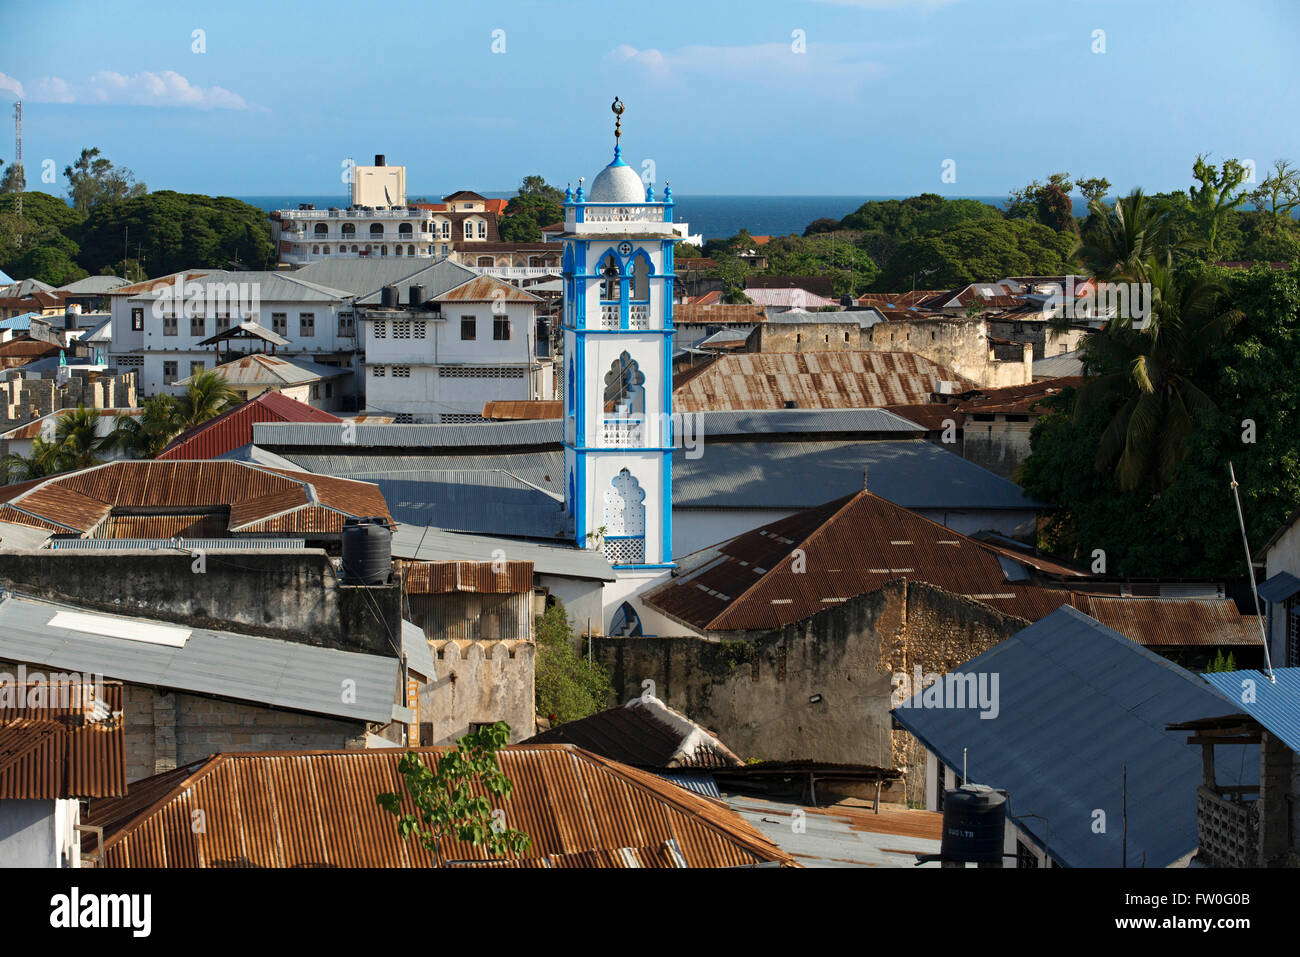 Minaret of one of the mosques in Stone Town, Zanzibar, Tanzania. The sunset invites to look for some terrace or highest point of Stock Photo